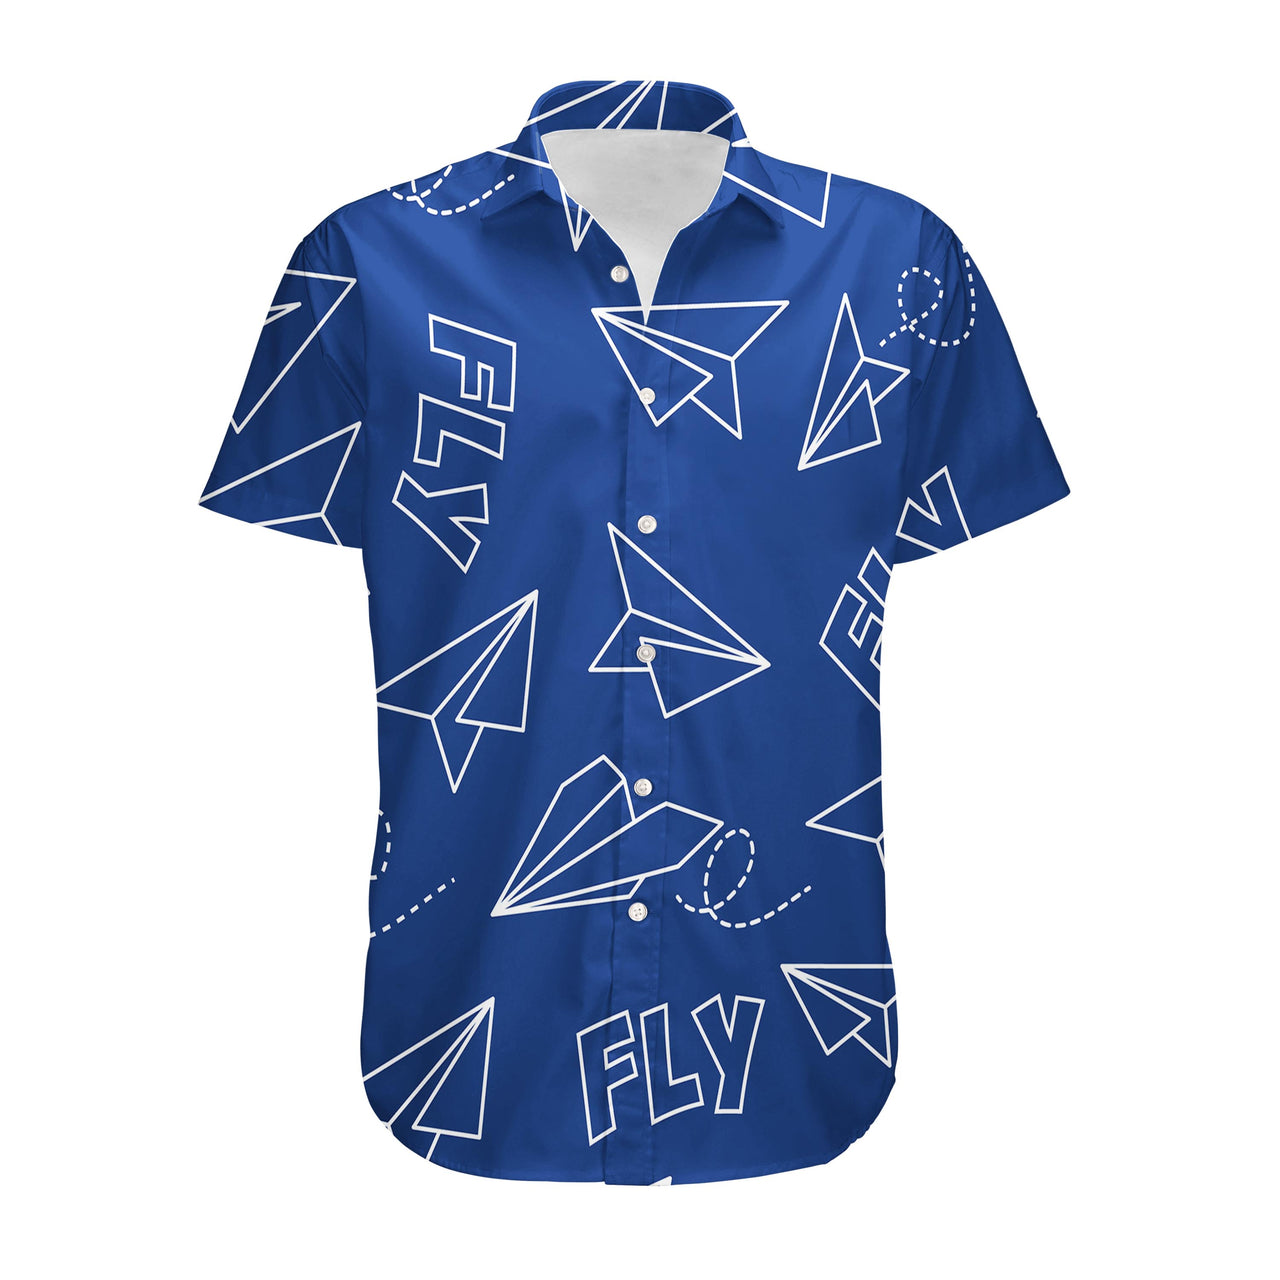 Paper Airplane & Fly (Blue) Designed 3D Shirts